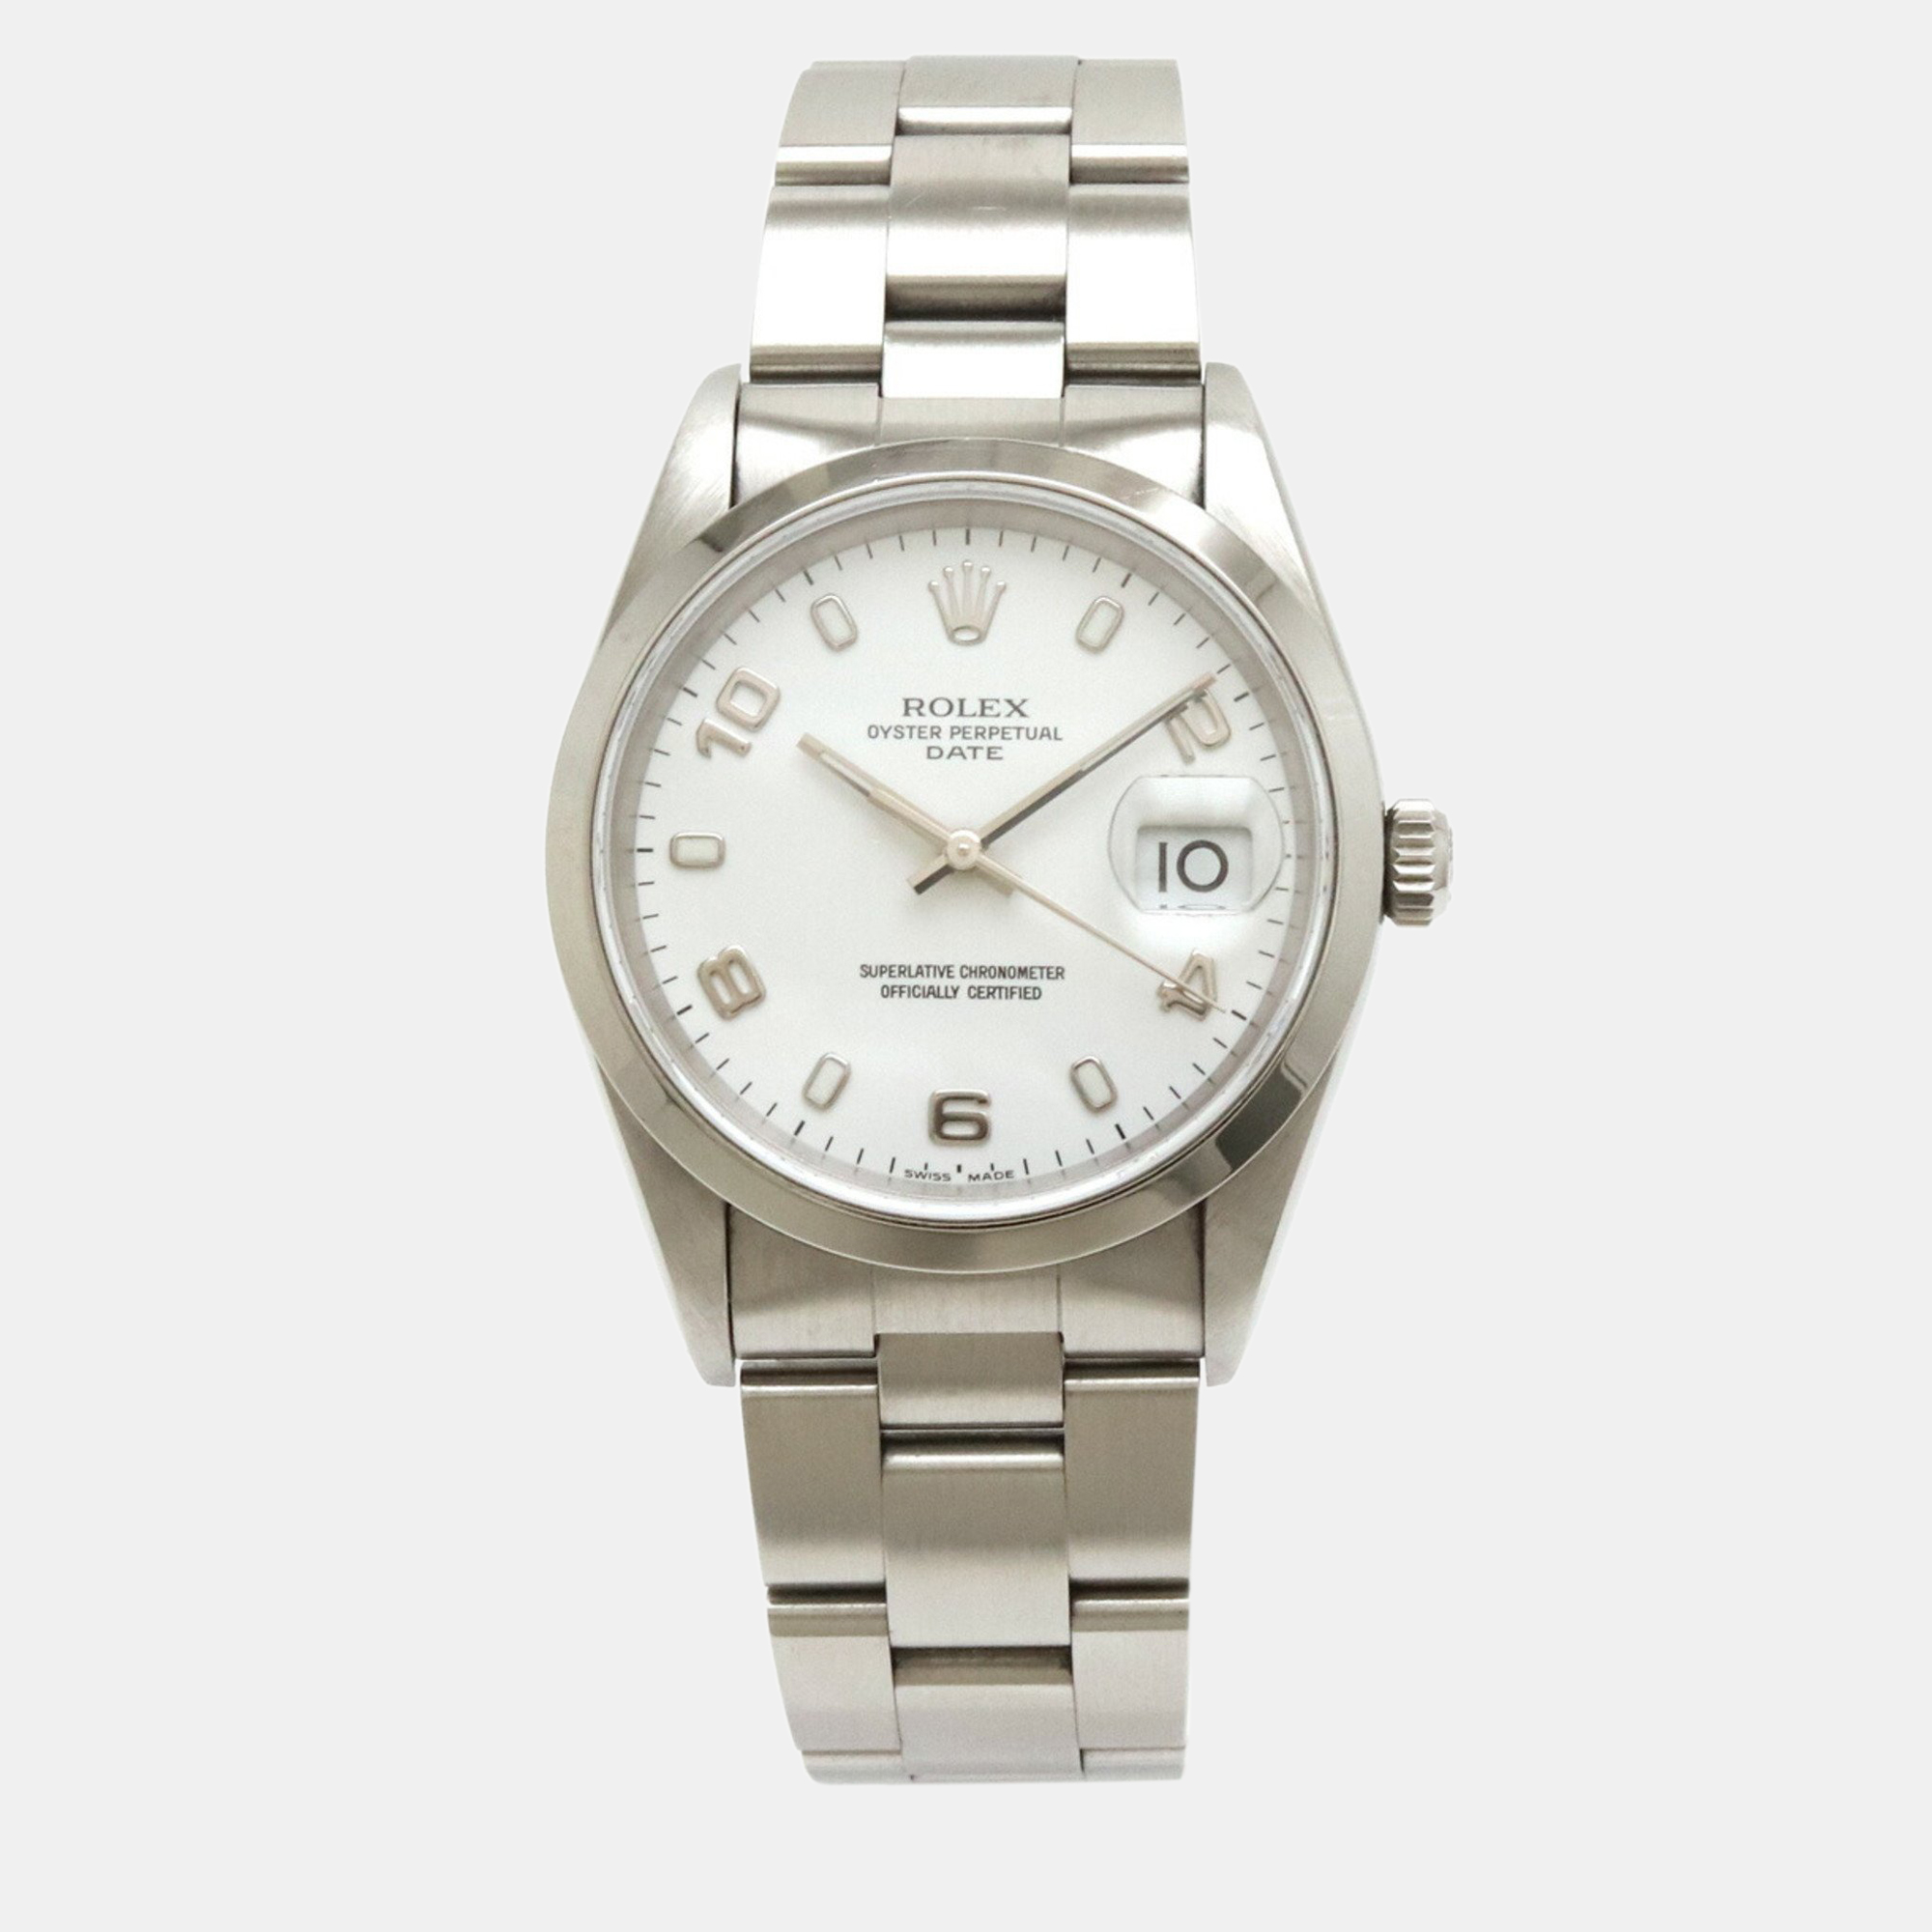 Let this authentic Rolex timepiece help you make every moment count Created with skill using high grade materials this watch is a functional accessory designed to impart a luxurious style while keeping you on time.